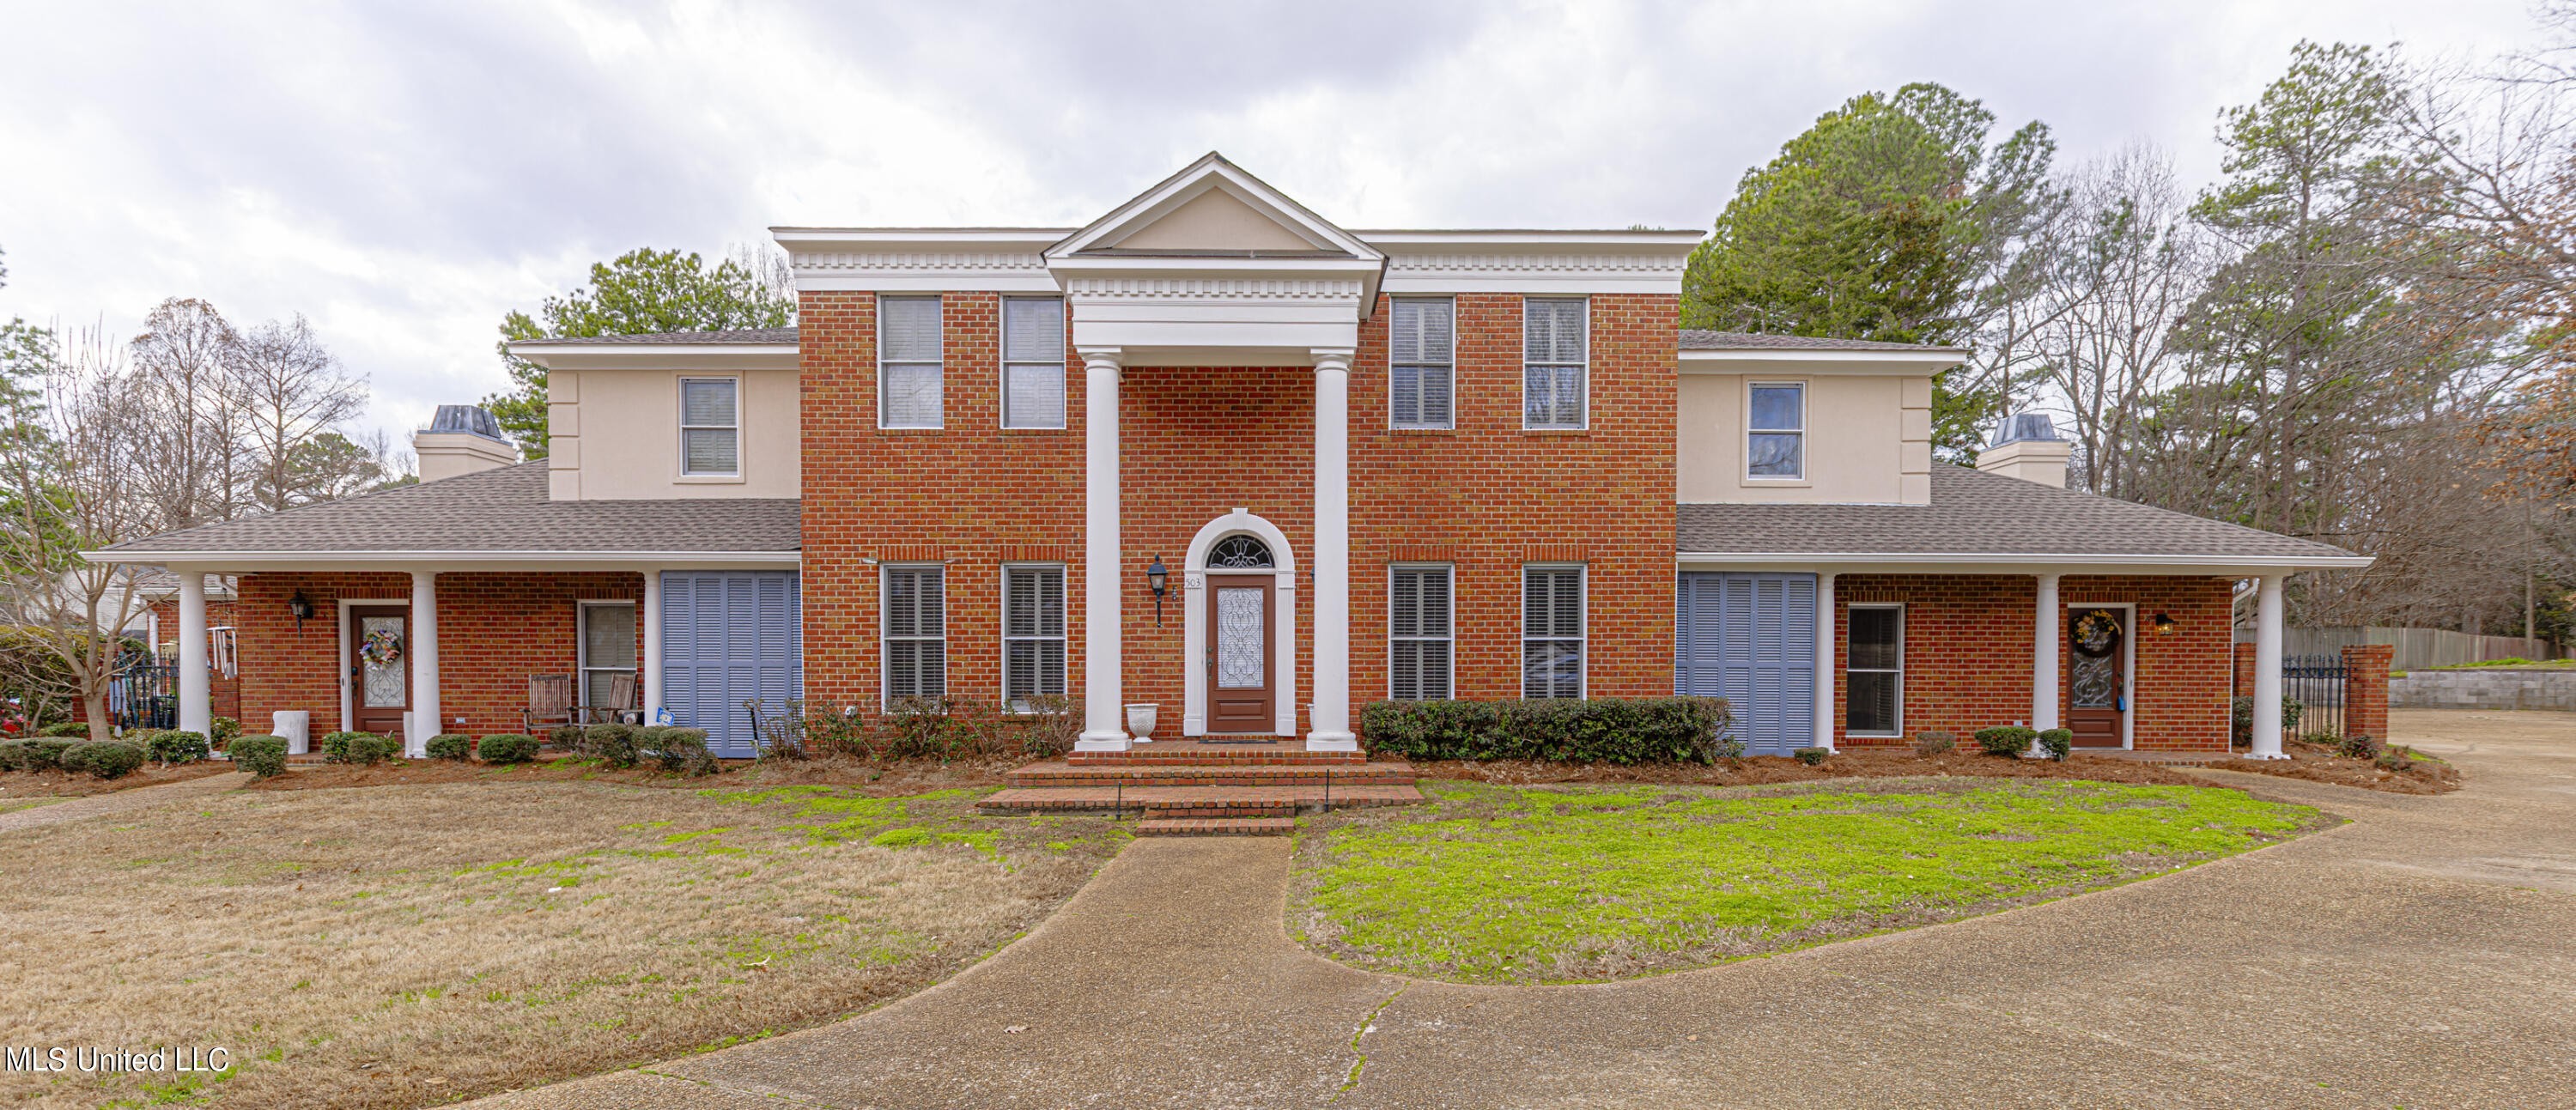 2. 503 A Northpointe Parkway